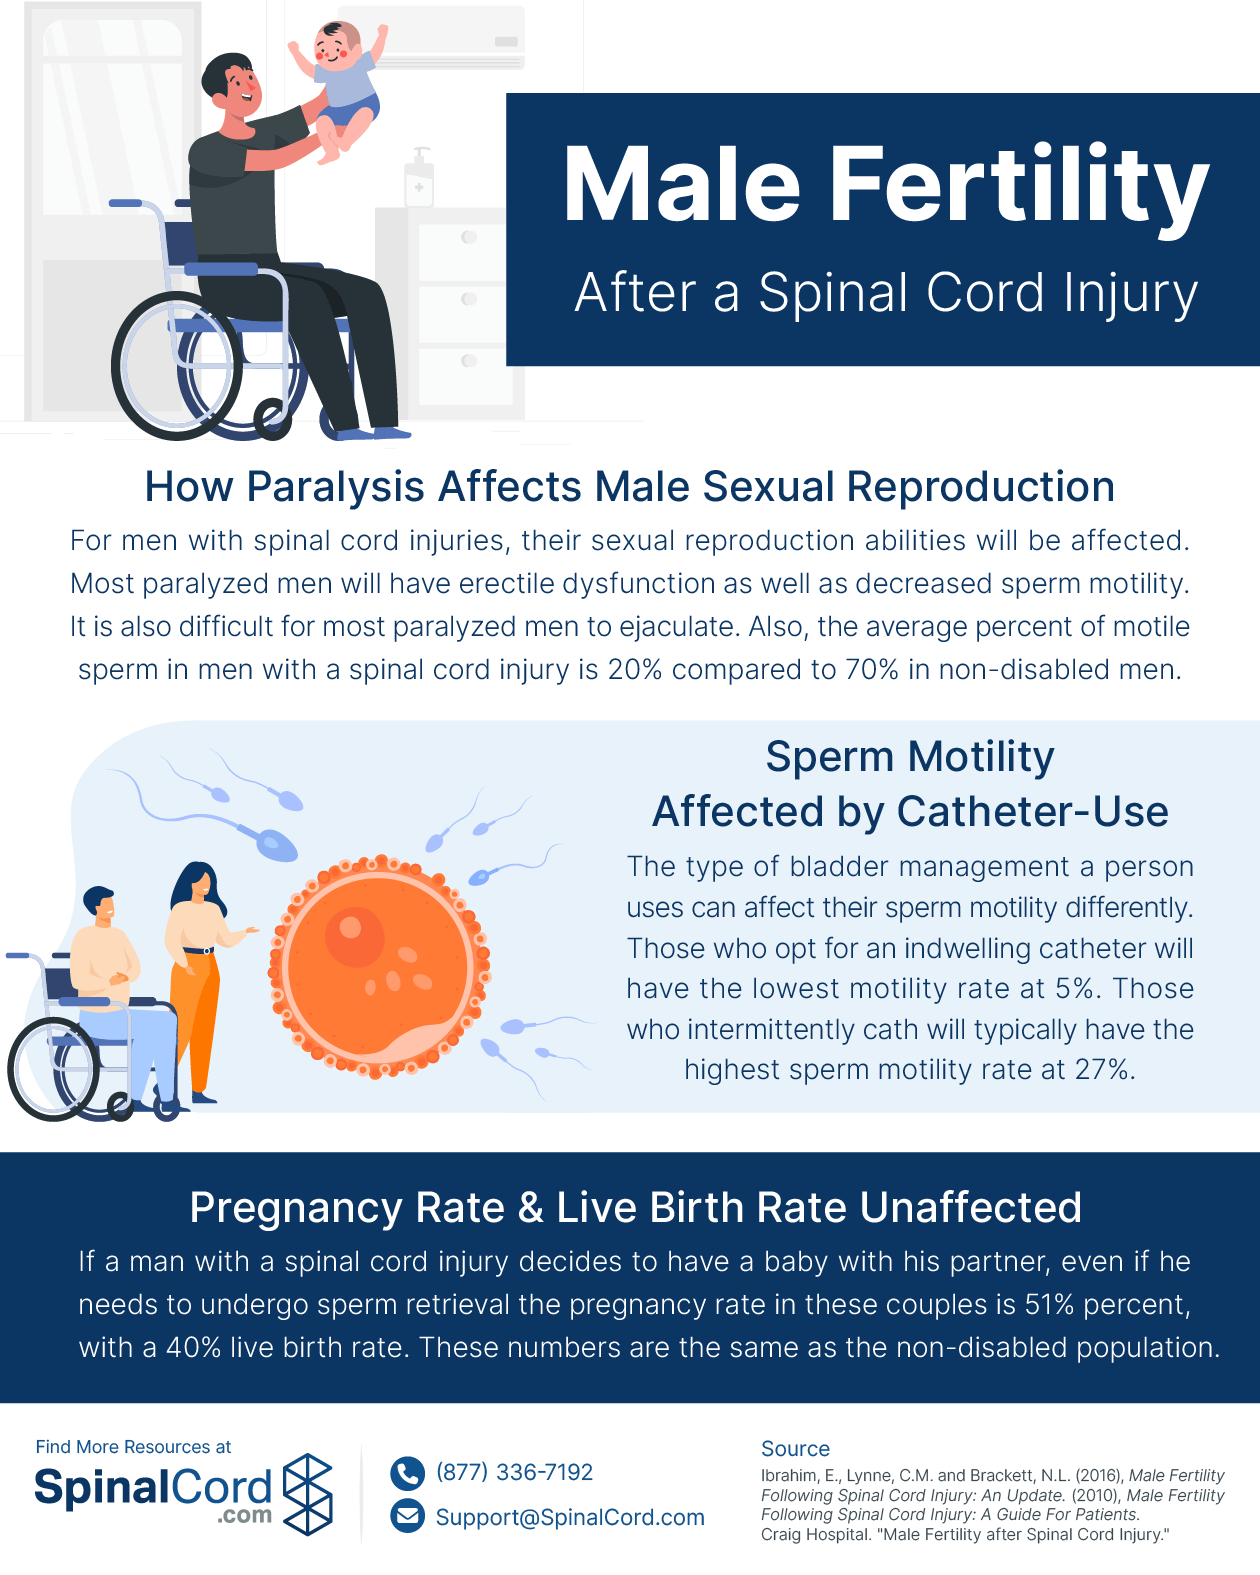 Male Fertility After a Spinal Cord Injury (Infographic)